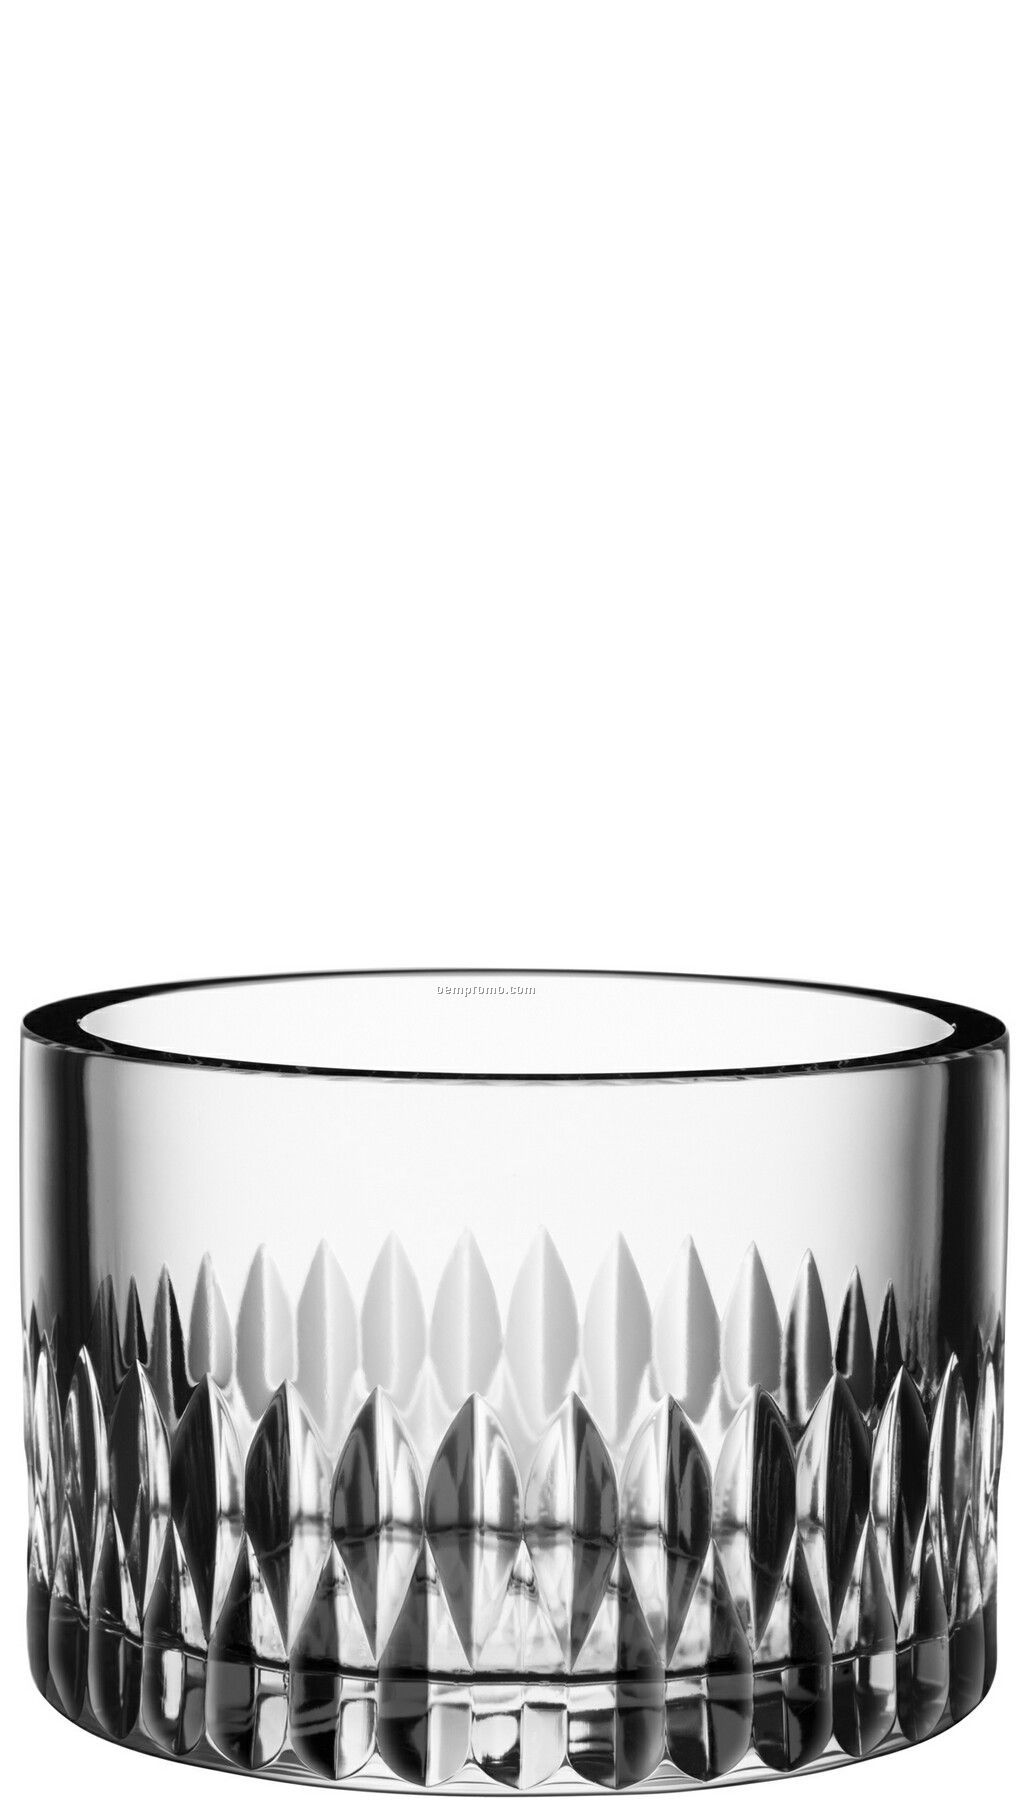 Crystal Reflections Bowl W/ Pointed Oval Design By Jan Johansson